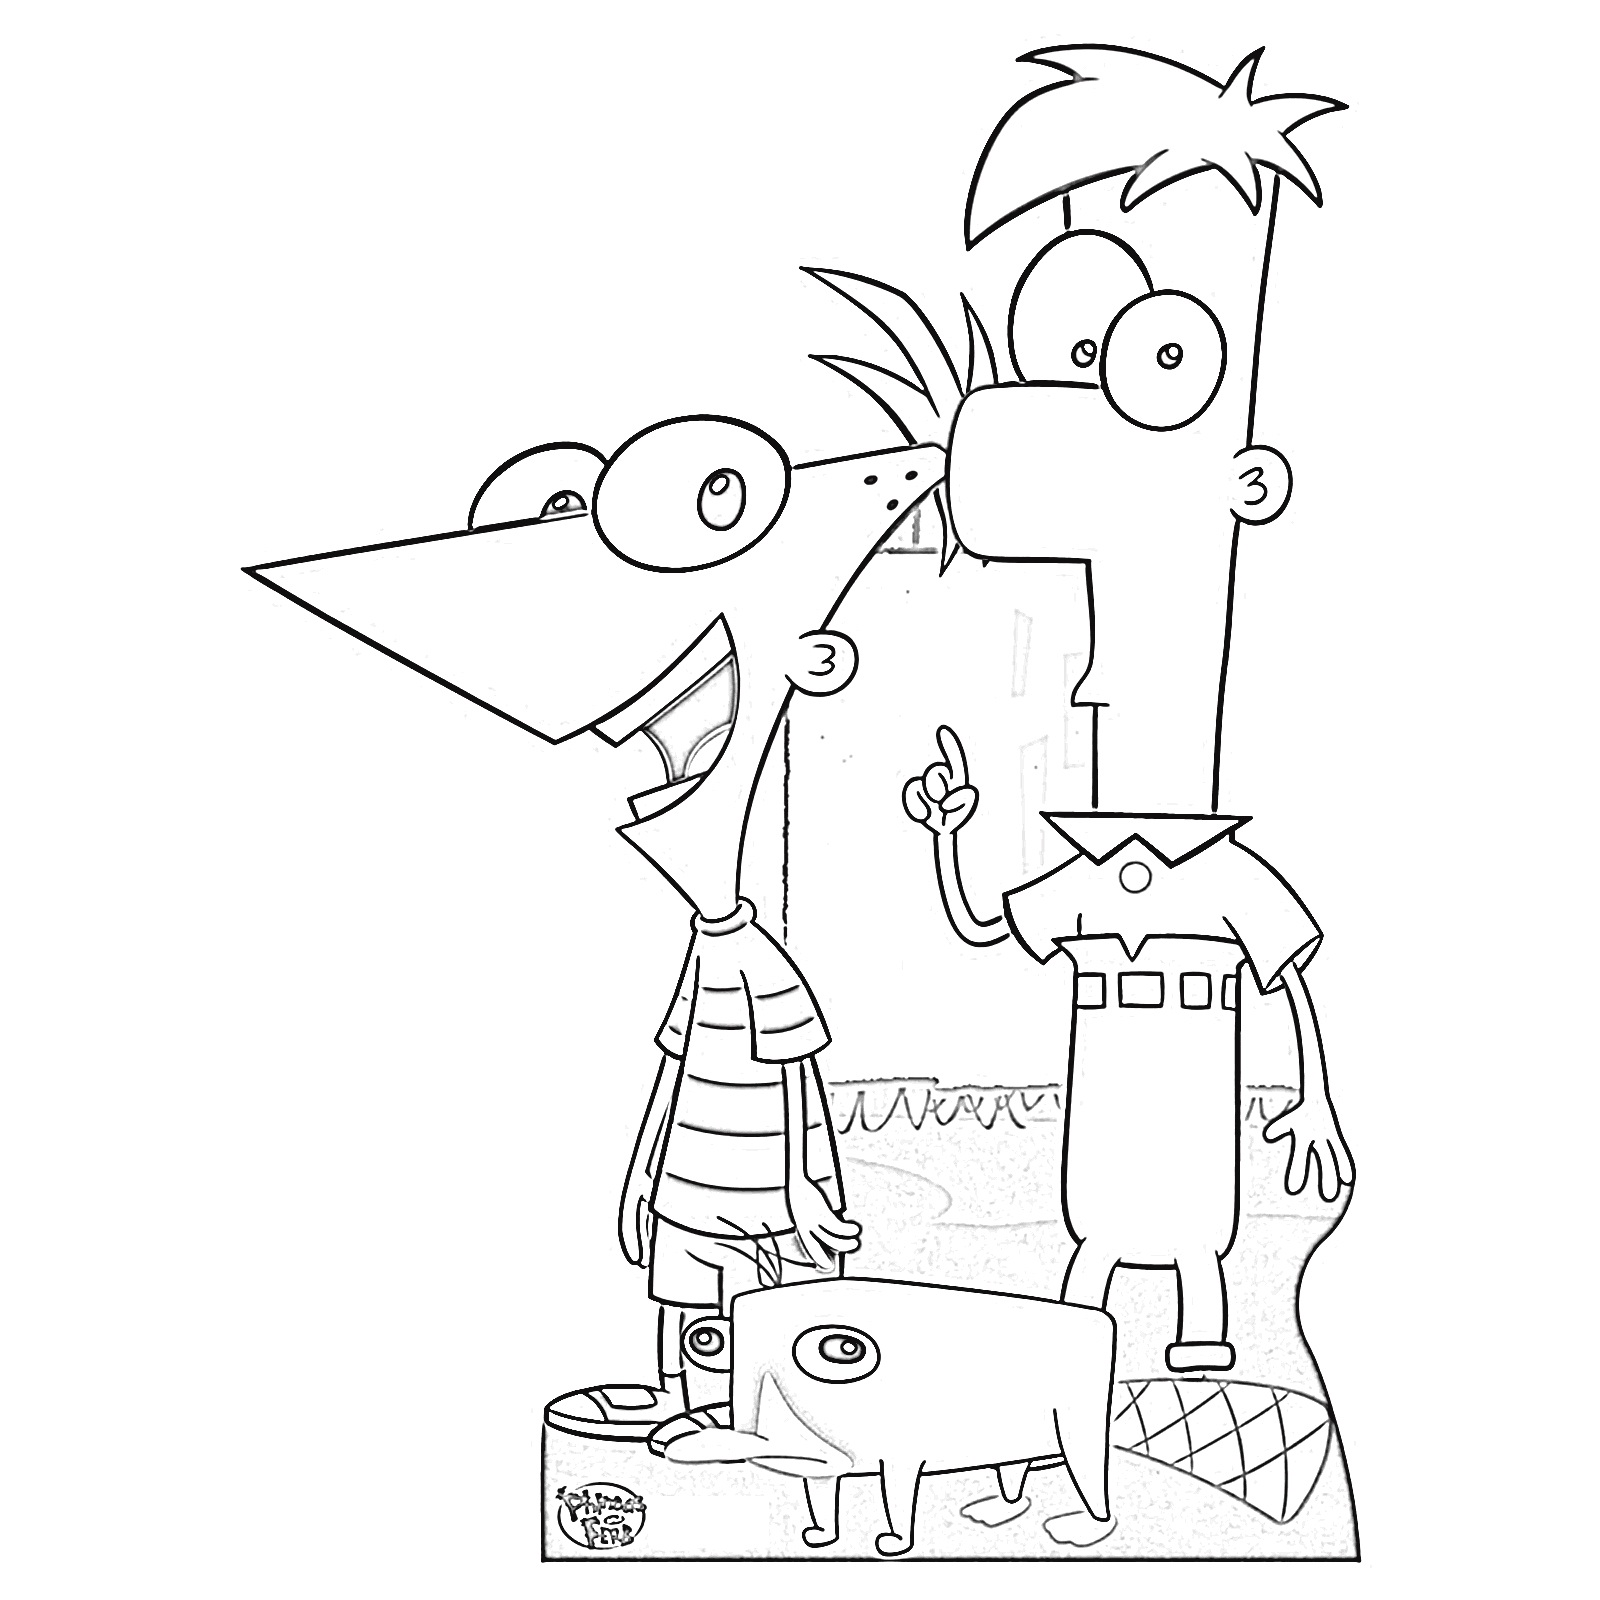 Phineas and Ferb Printables